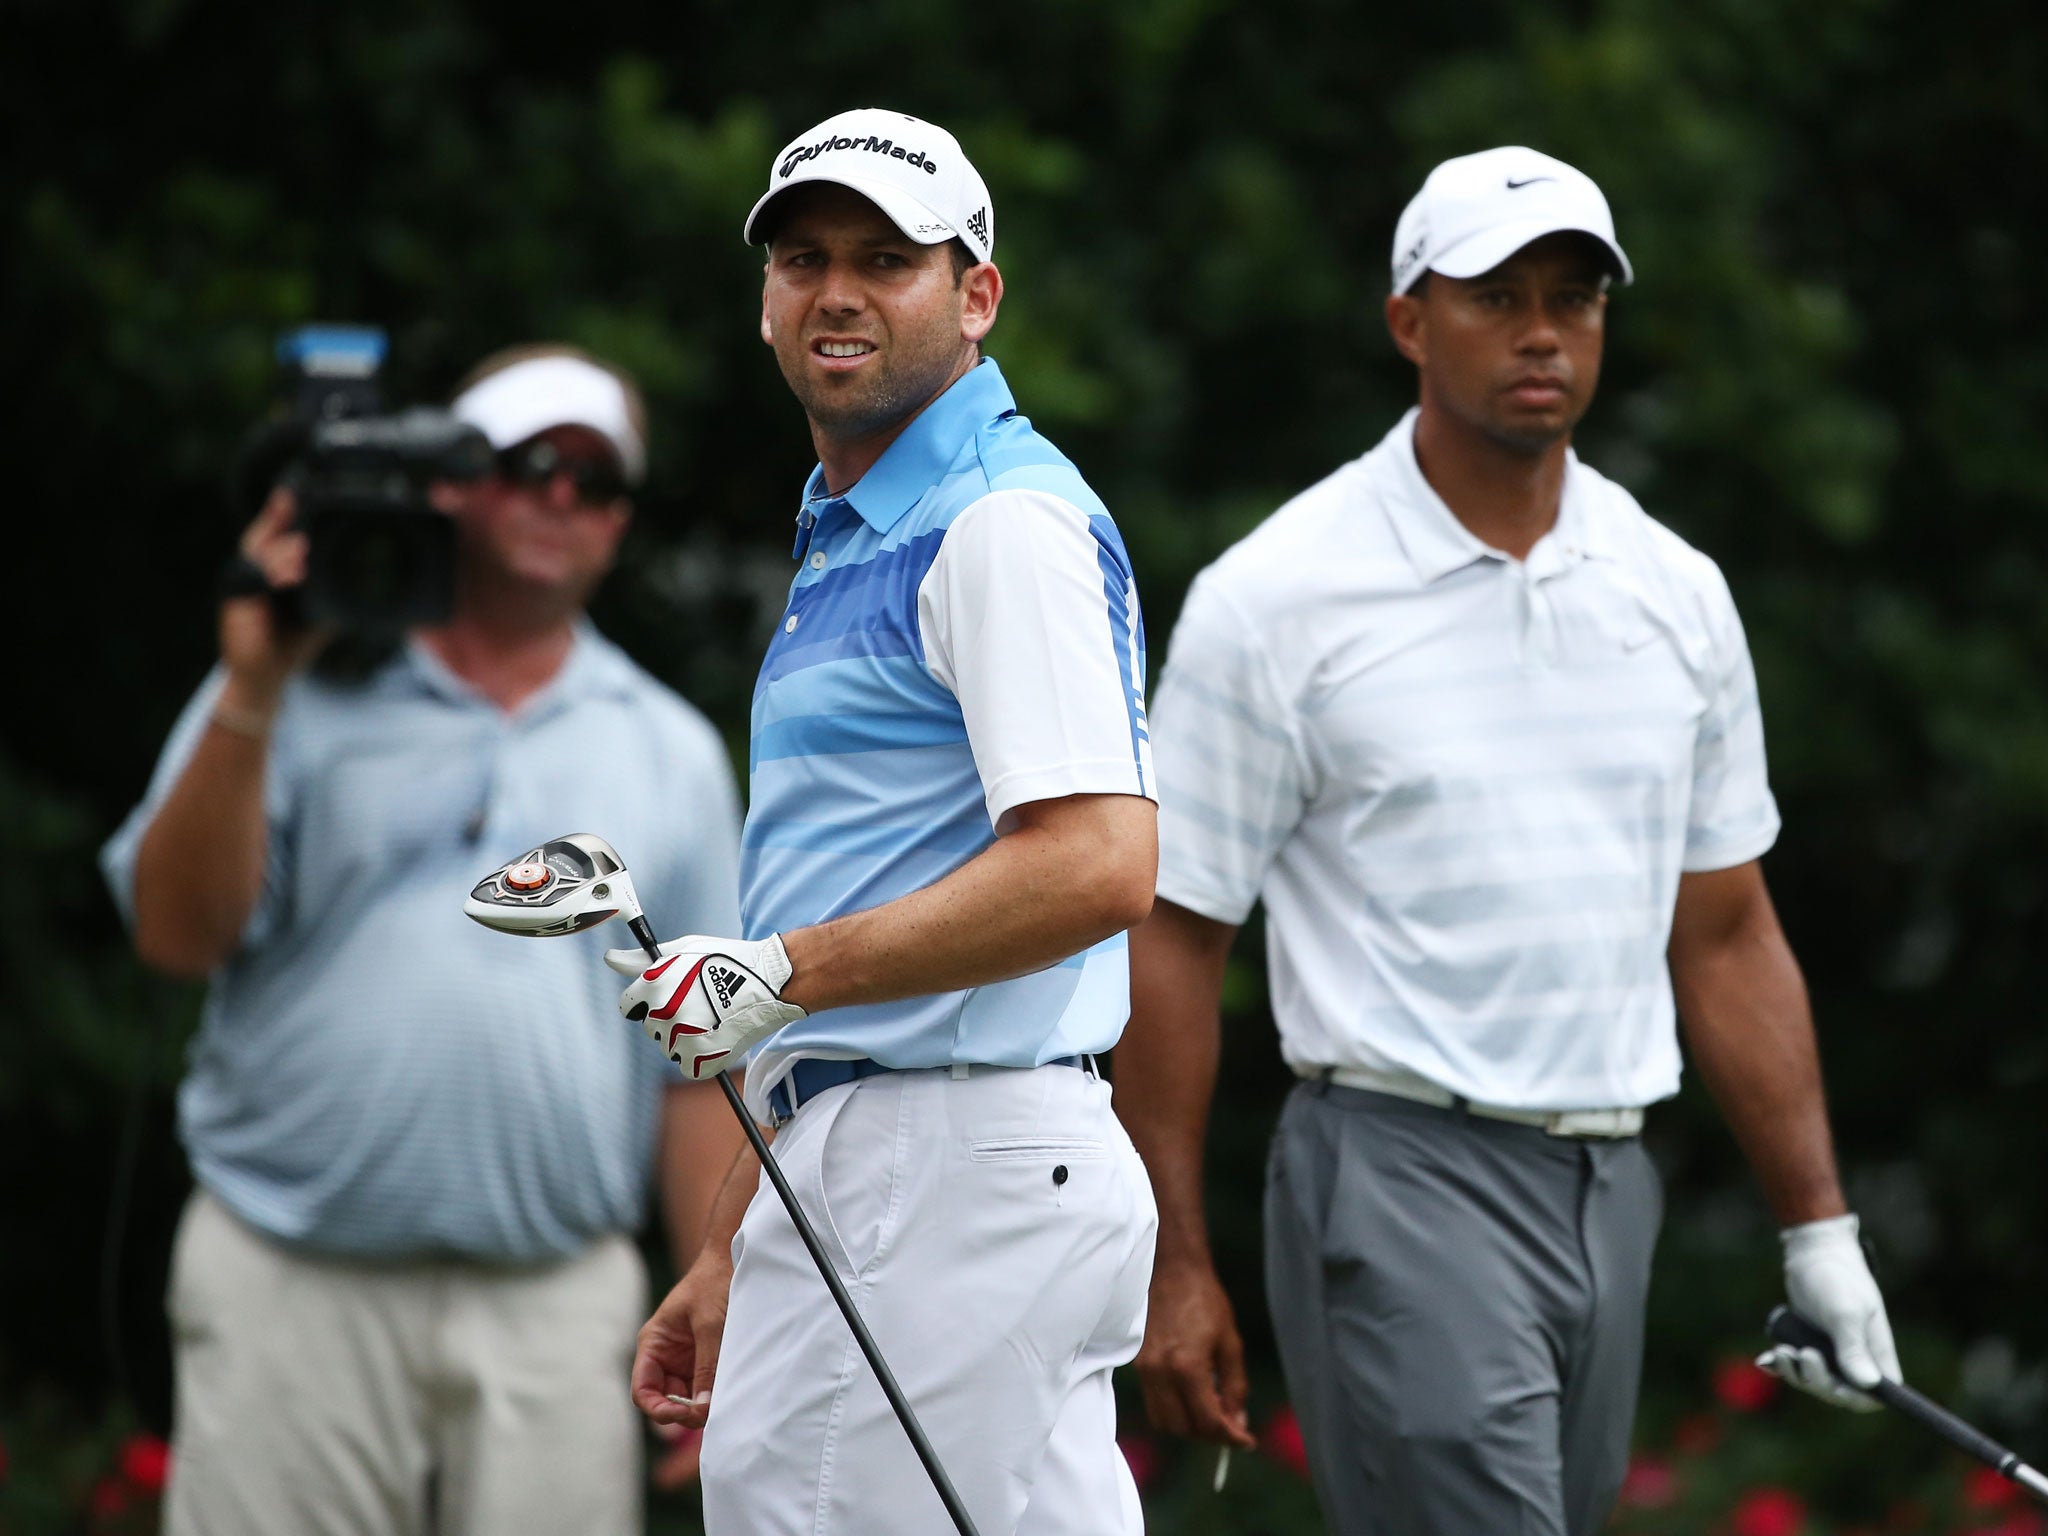 Tiger Woods and Sergio Garcia; there is no love lost between the two great golfers